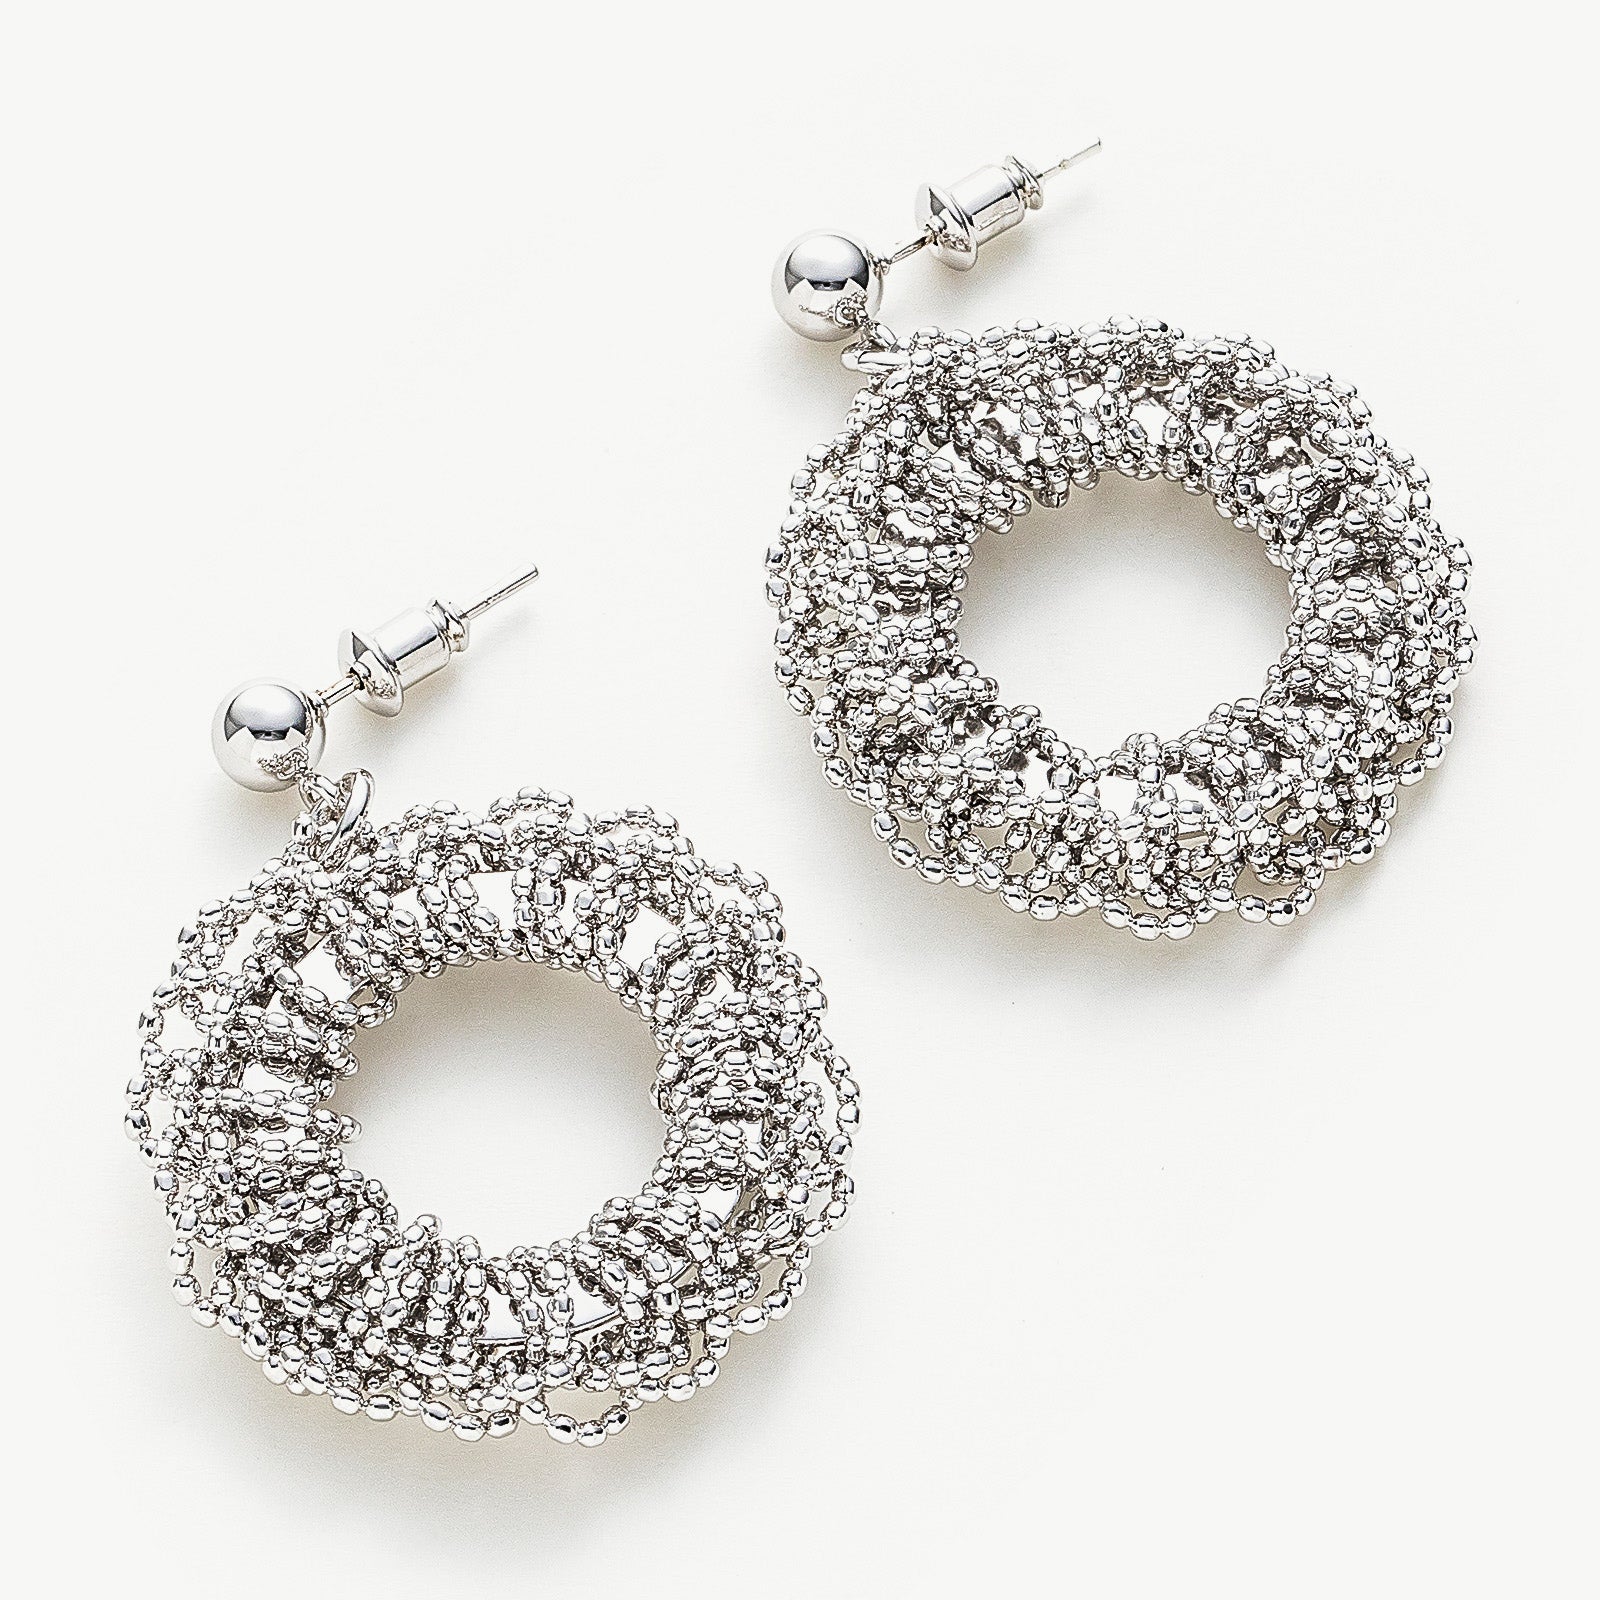 Flower Entwine Earrings with sculpted petal accents, these hoops provide a unique and artistic charm, capturing attention with their intricate floral details and sculptural beauty.